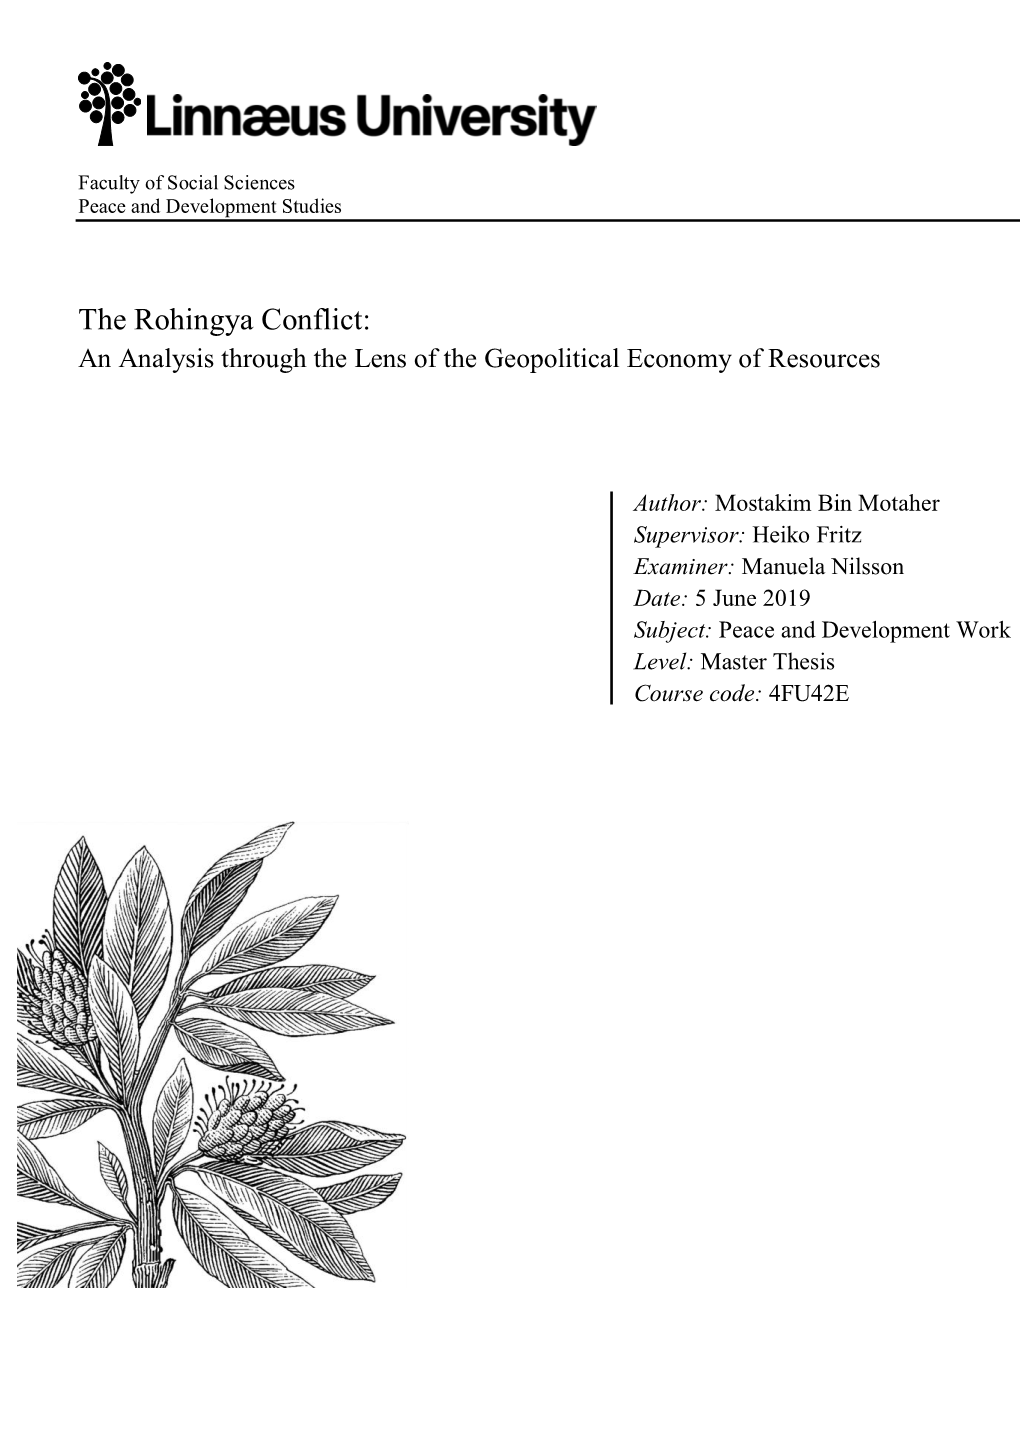 The Rohingya Conflict: an Analysis Through the Lens of the Geopolitical Economy of Resources